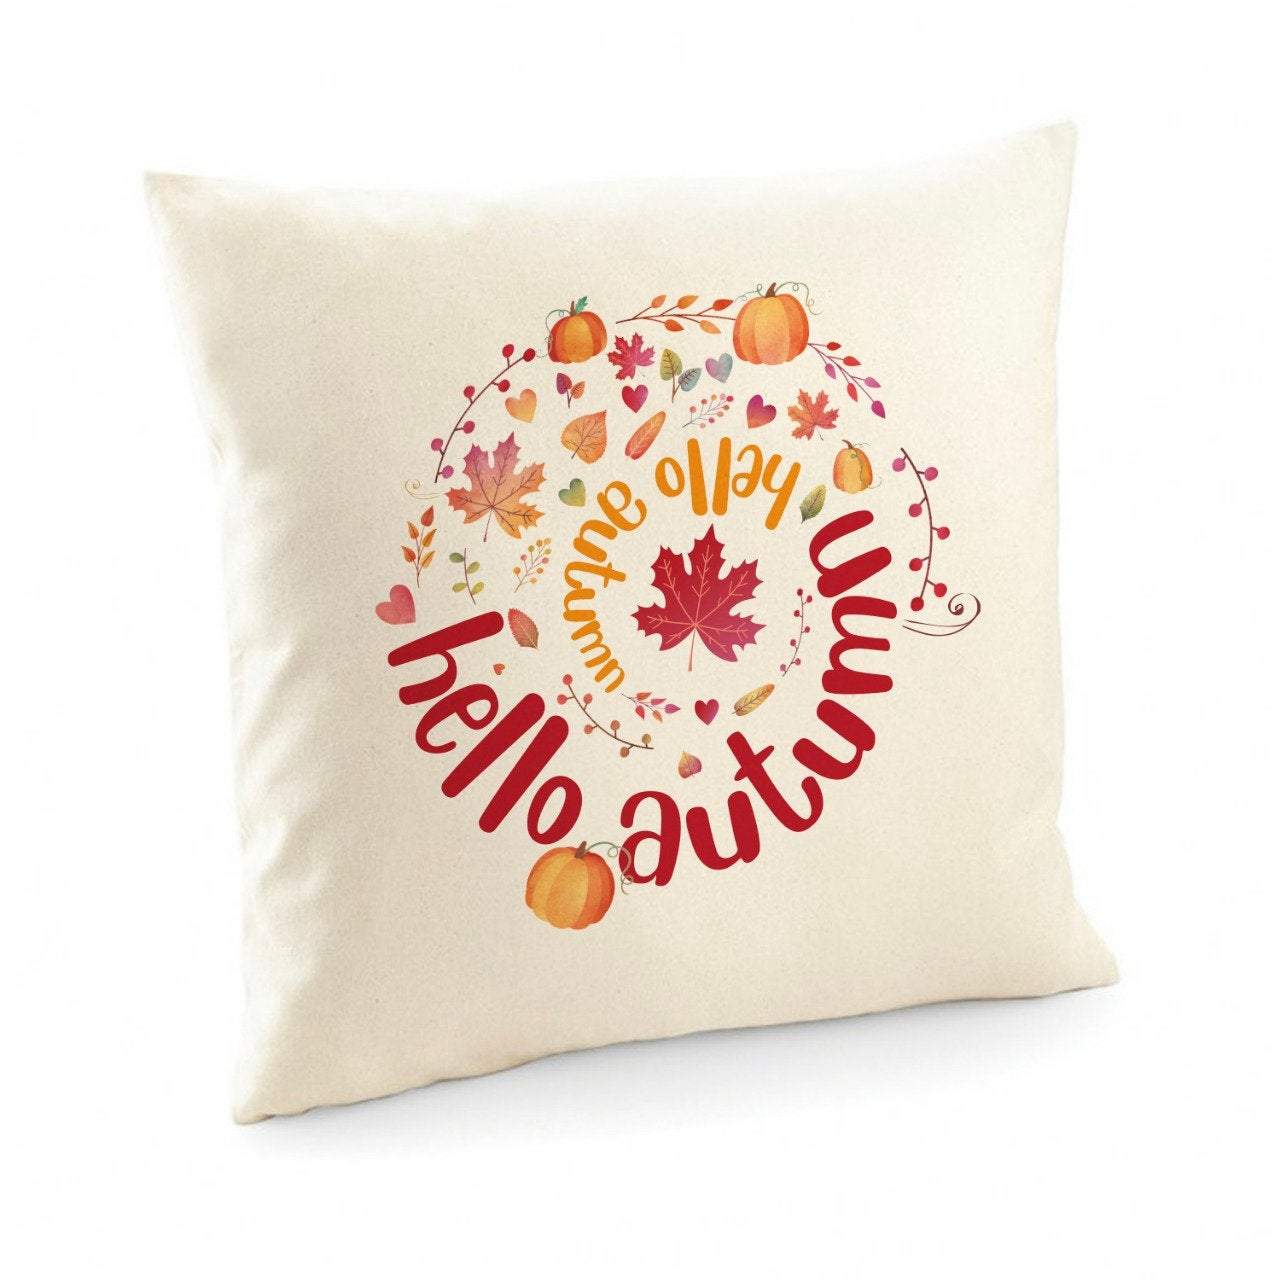 Hello Autumn cushion cover with autumn leaves and pumpkins